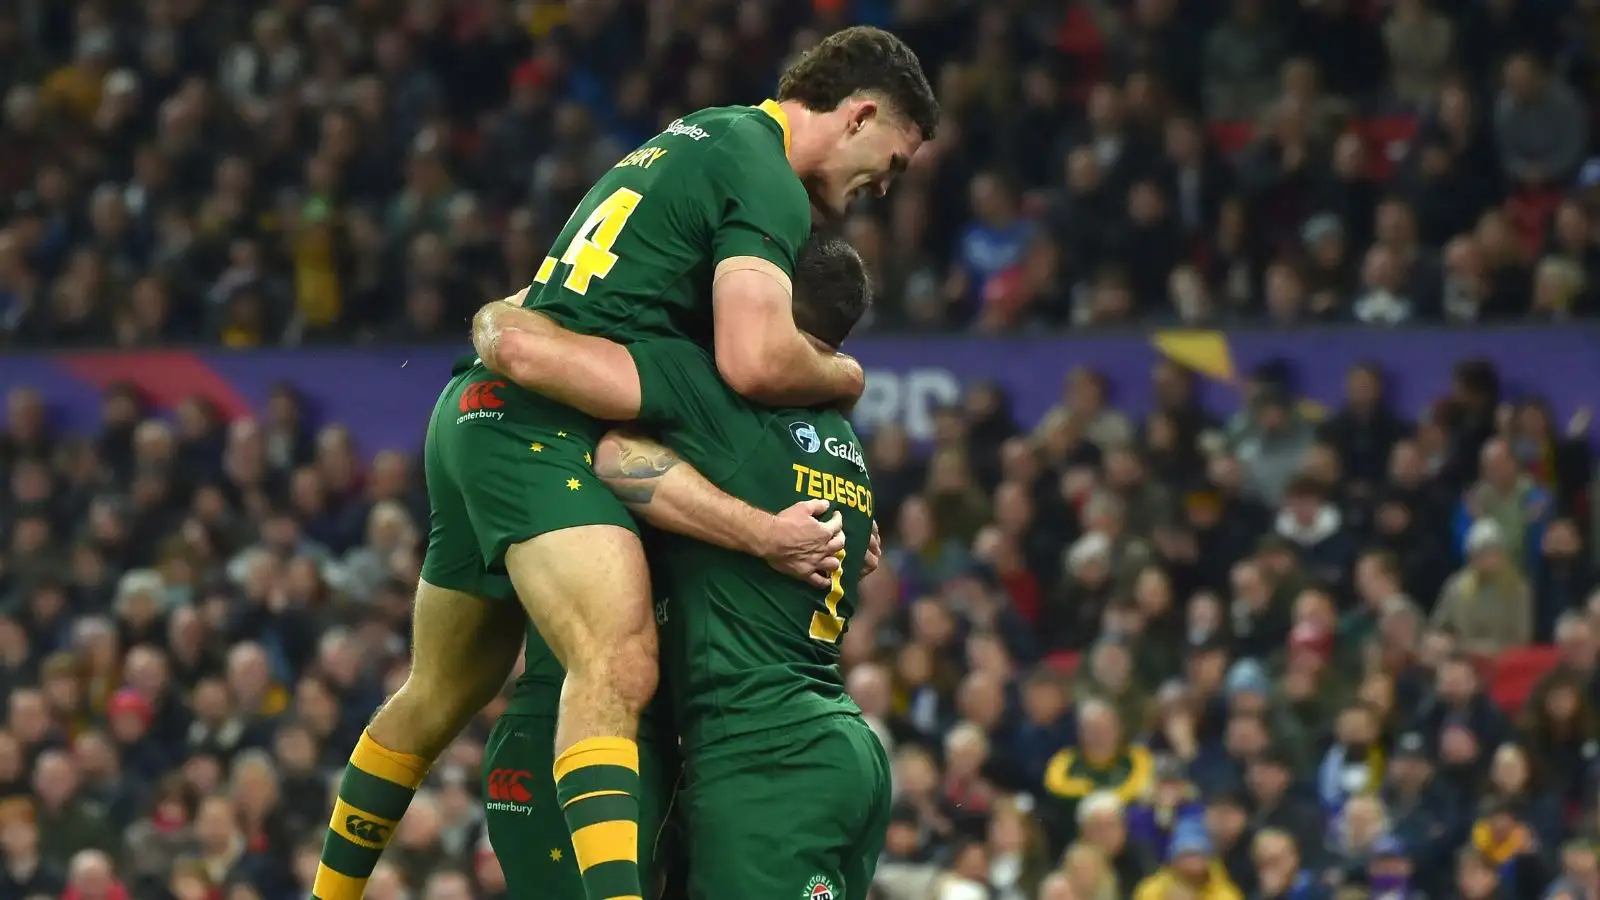 Australia celebrate try in 2021 World Cup Final